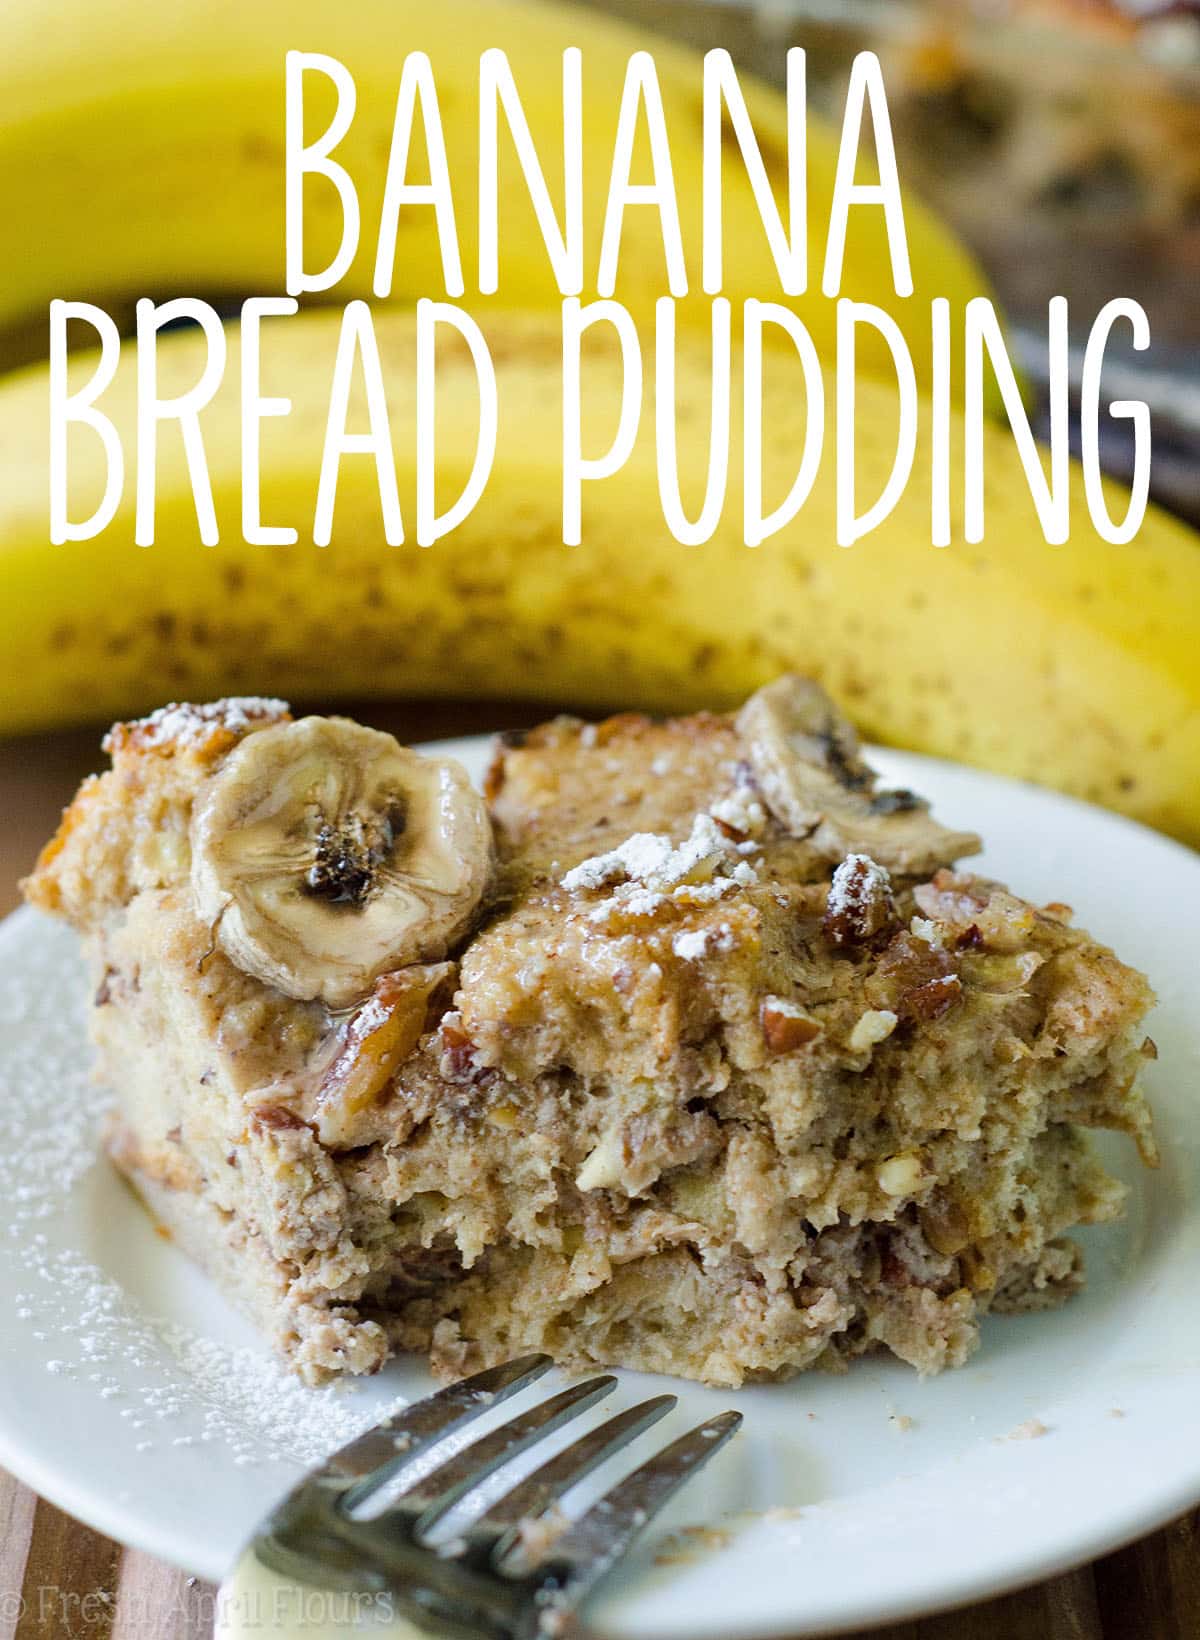 Banana Bread Pudding: A simple bread pudding made with Greek yogurt and egg custard soaked bread sweetened with brown sugar and naturally sweet bananas. via @frshaprilflours